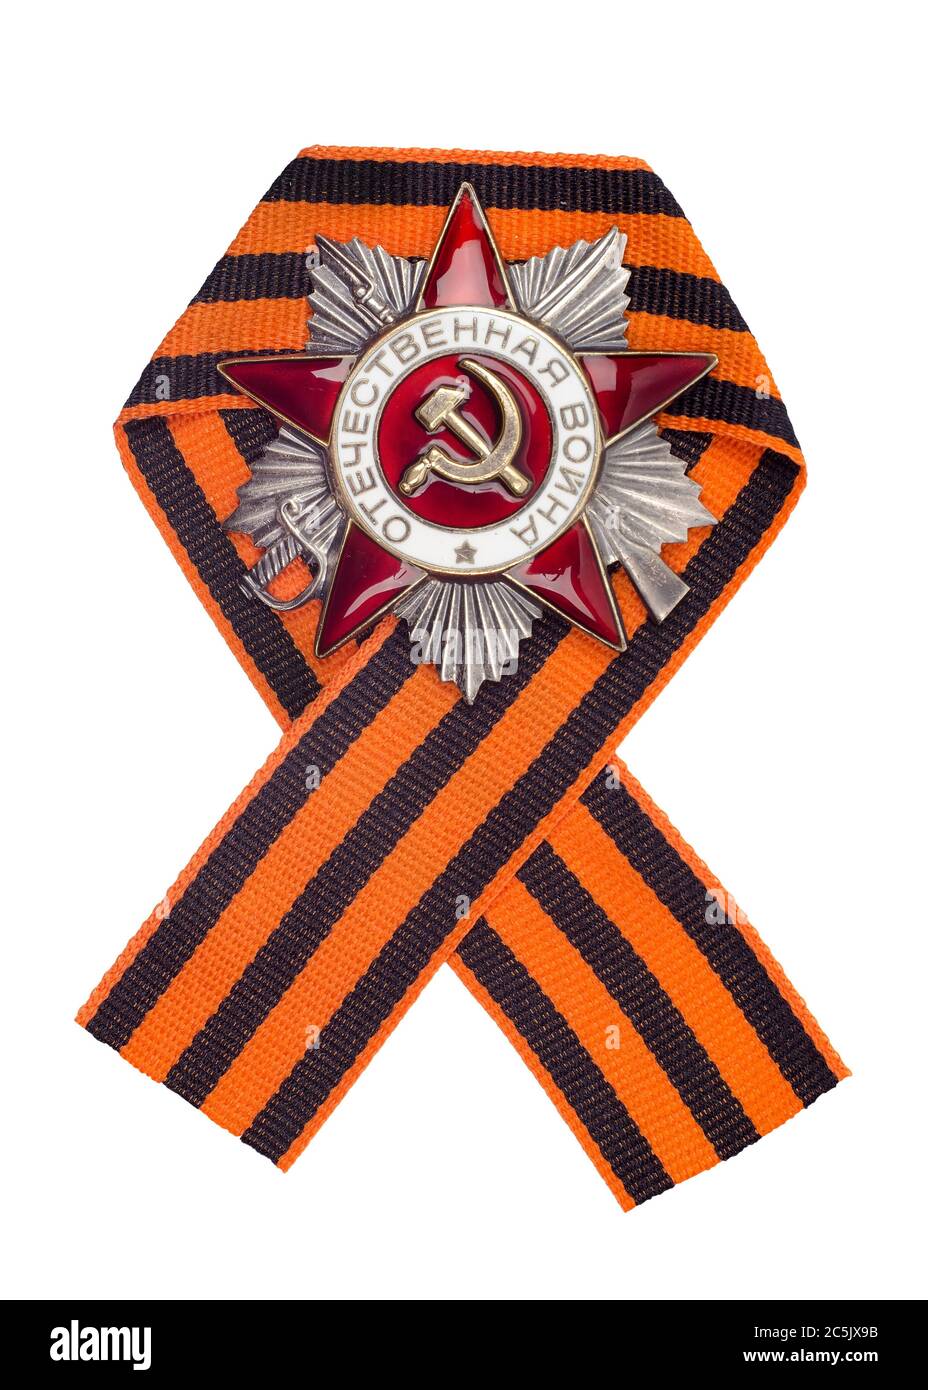 Soviet Order of the Great Patriotic War at the St. George ribbon. Symbol of Russia's victory in World War II. Isolated on white. Stock Photo